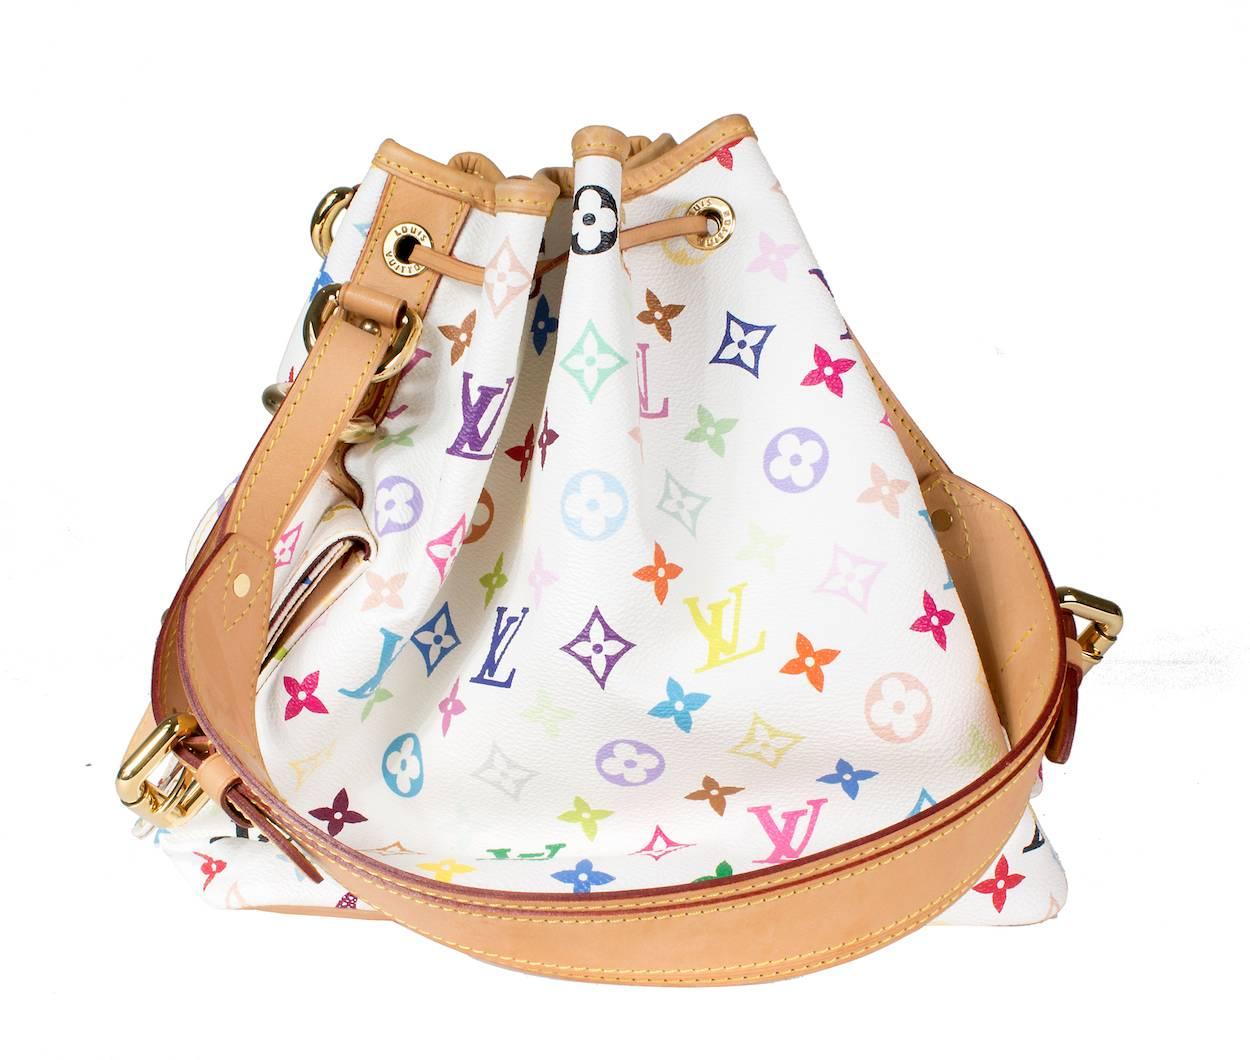 This is a bucket bag by Louis Vuitton.  It's white leather with multicolor monogram.  The bag has two small side pockets with belt buckle closure.  It has a natural color leather shoulder strap that is adjustable to drop between 7.5